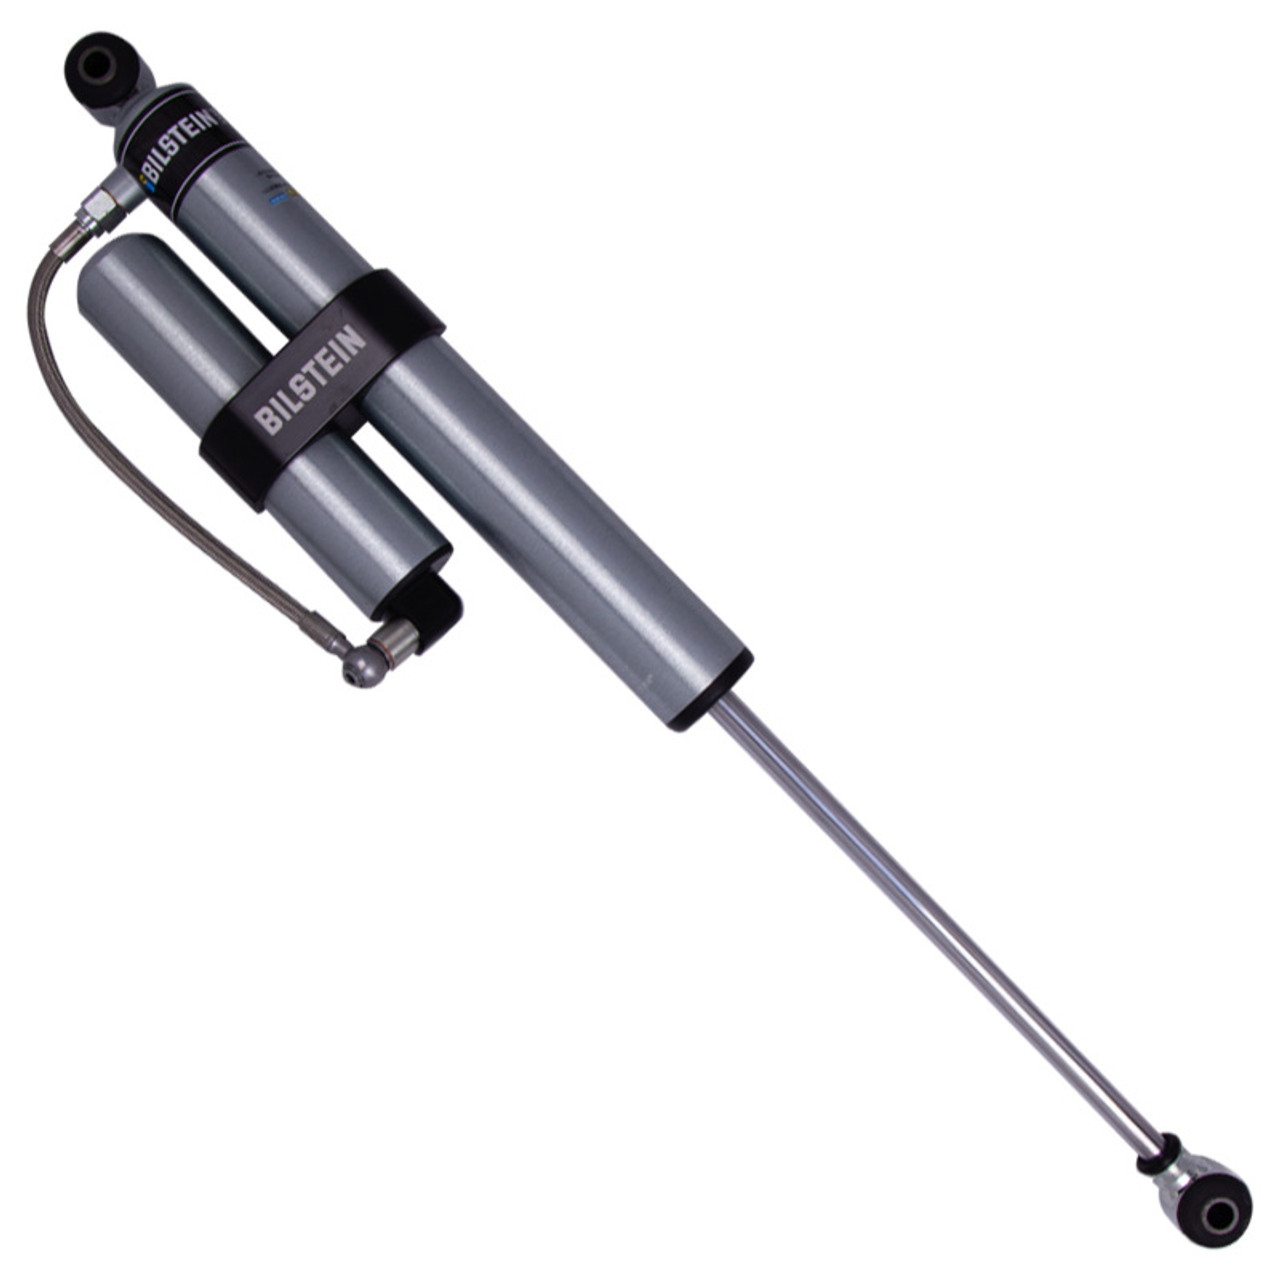 Bilstein 5160 Series 04-08 Ford F-150/06-08 Lincoln Mark LT Rear Shock Absorber (Lifted Ht 0-2in) - 25-325065 User 1